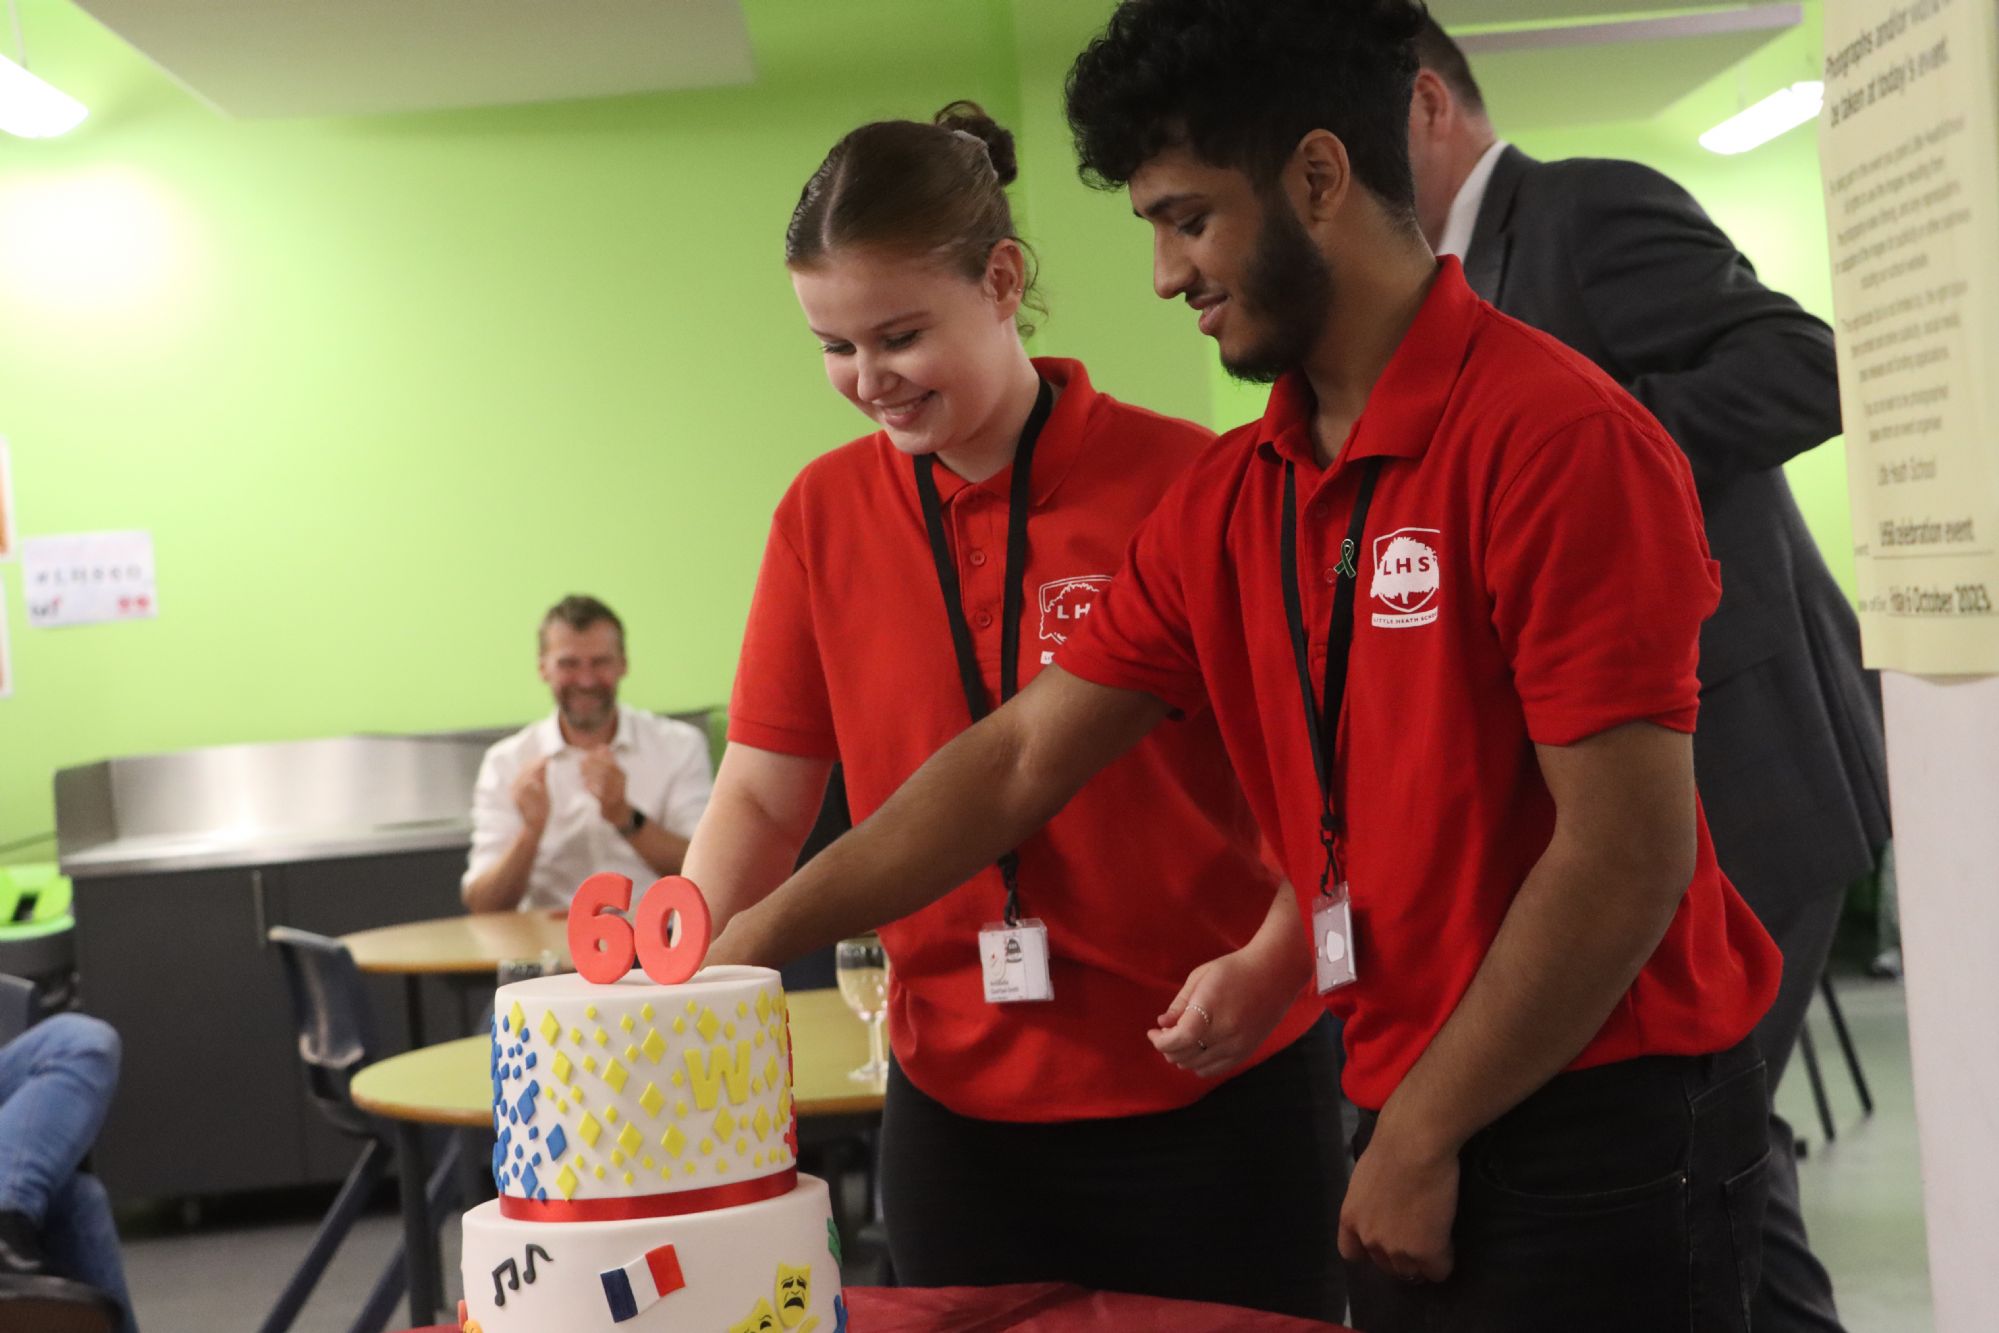 Head students cut the cake